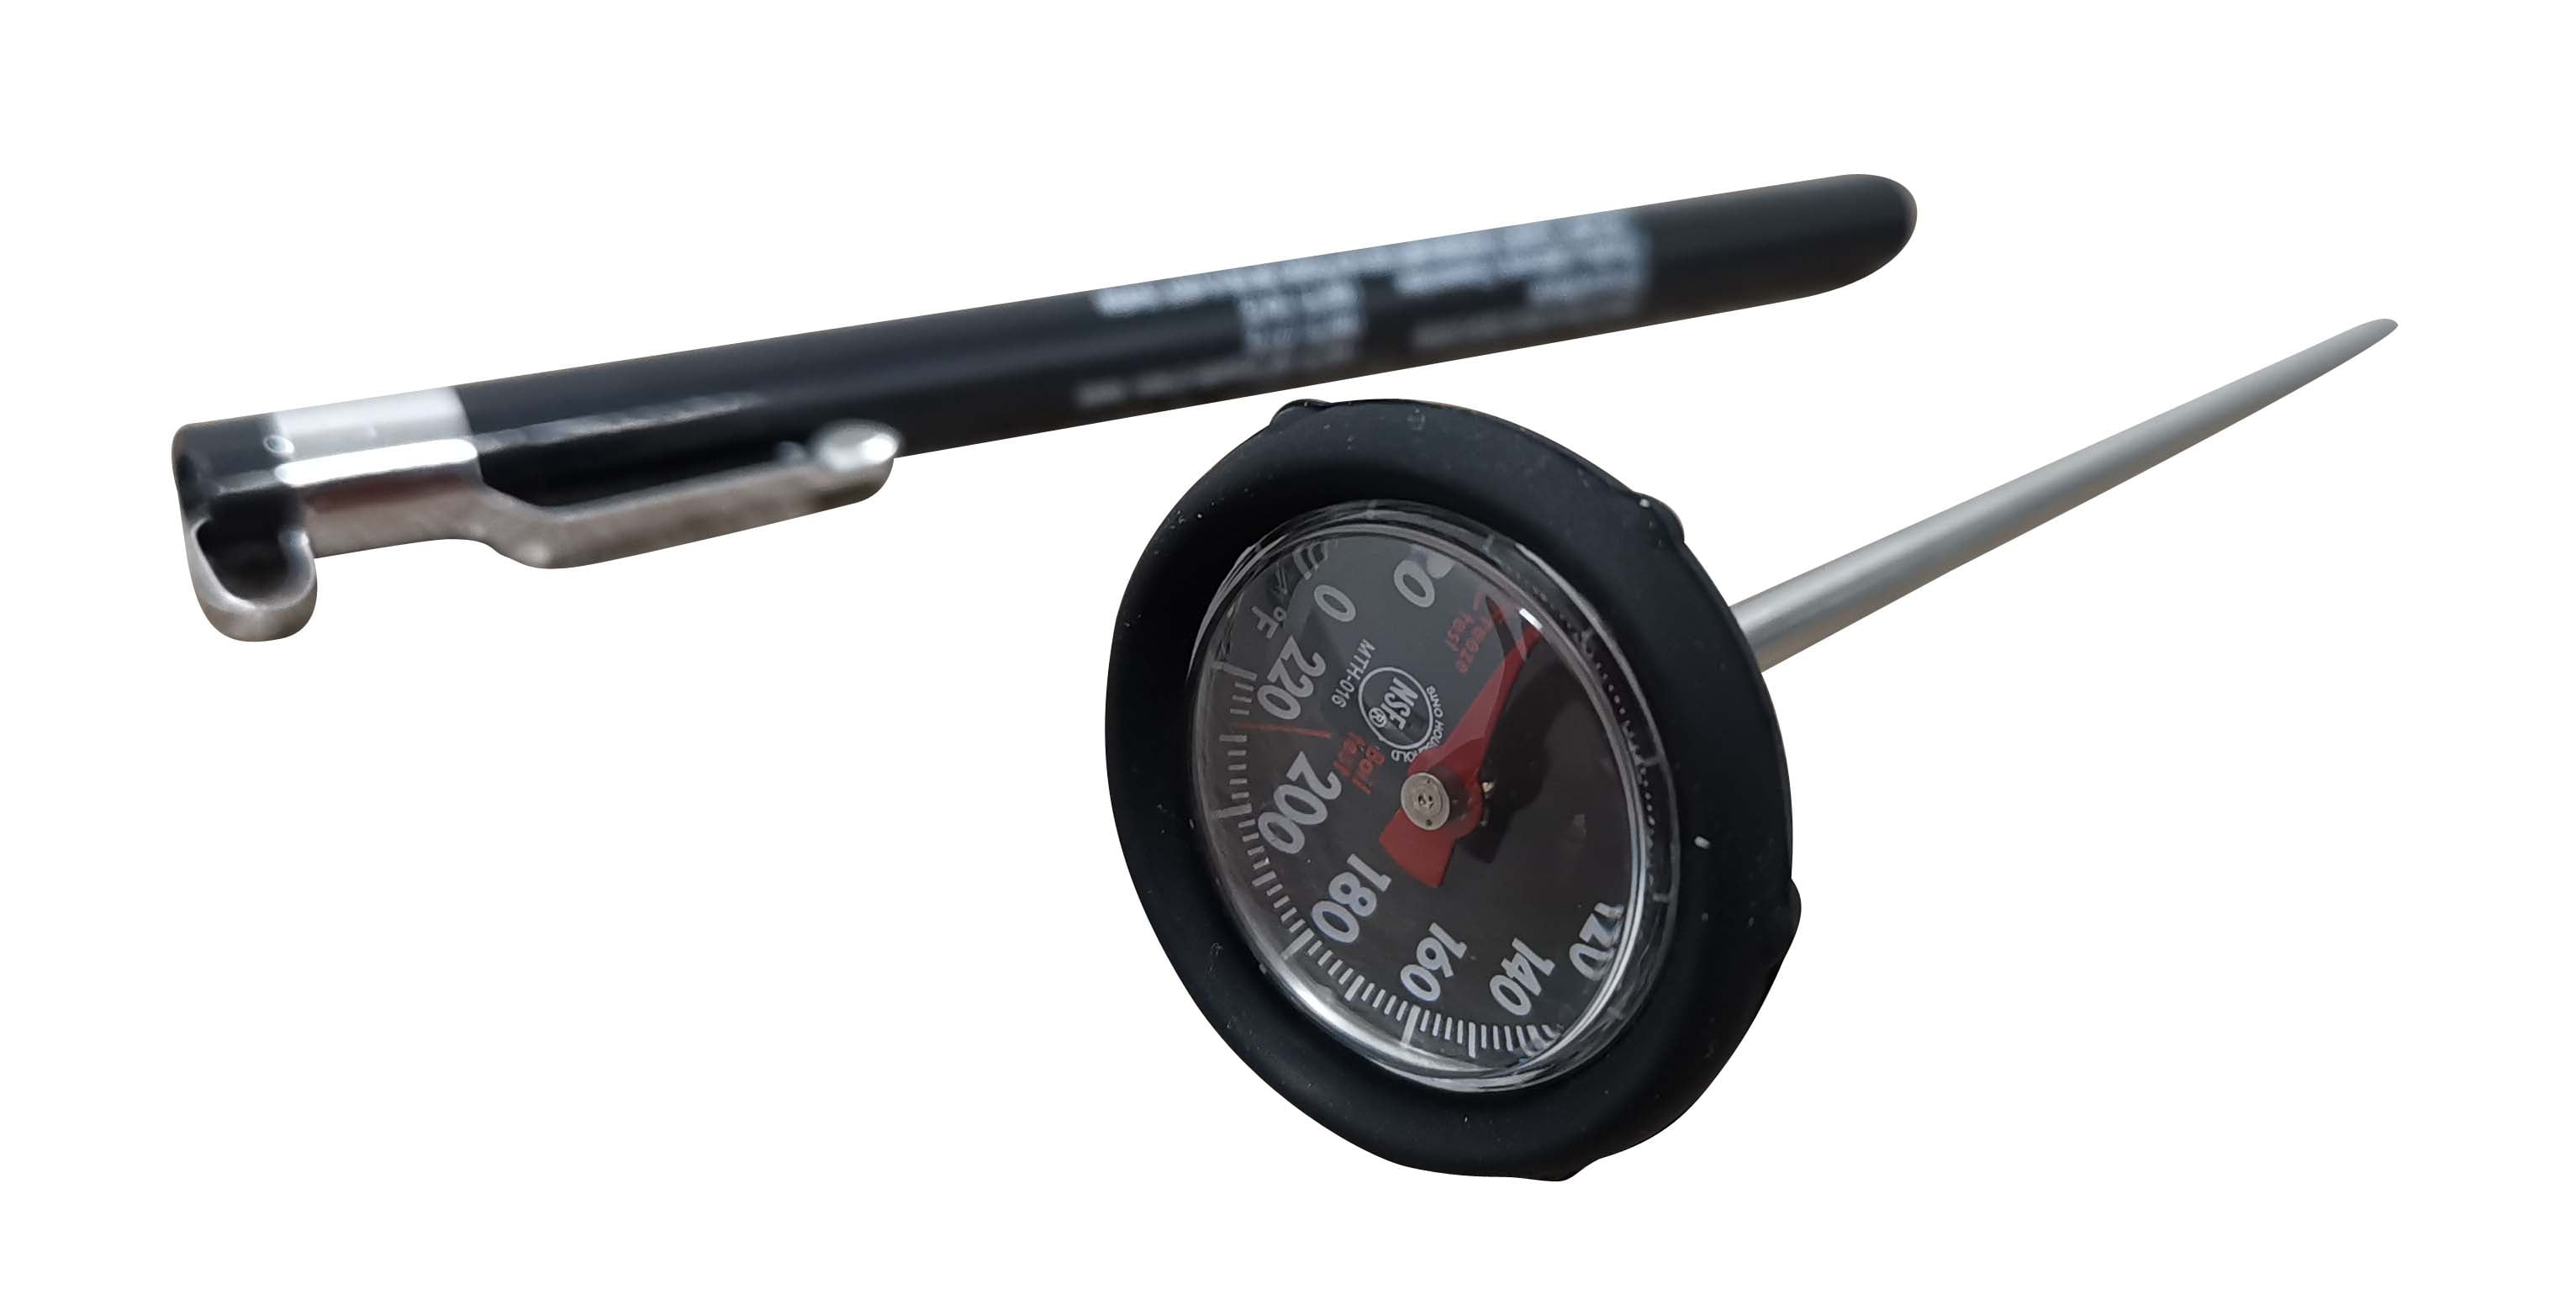 Mainstays Instant Response Kitchen Thermometer, Clip Attachment